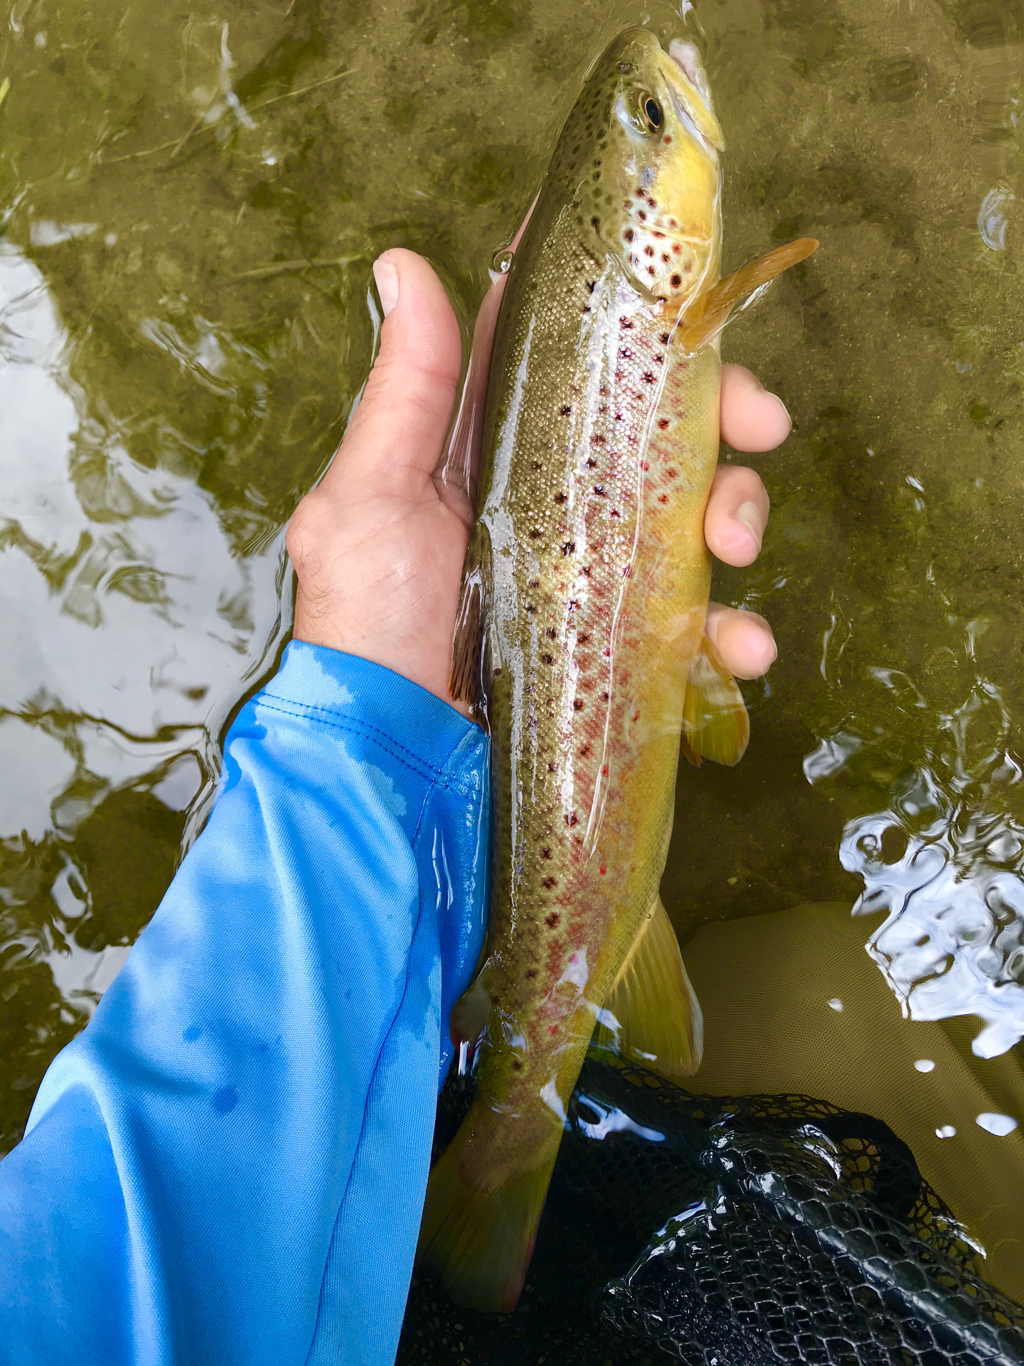 Tennessee & North Carolina Fly Fishing Guides